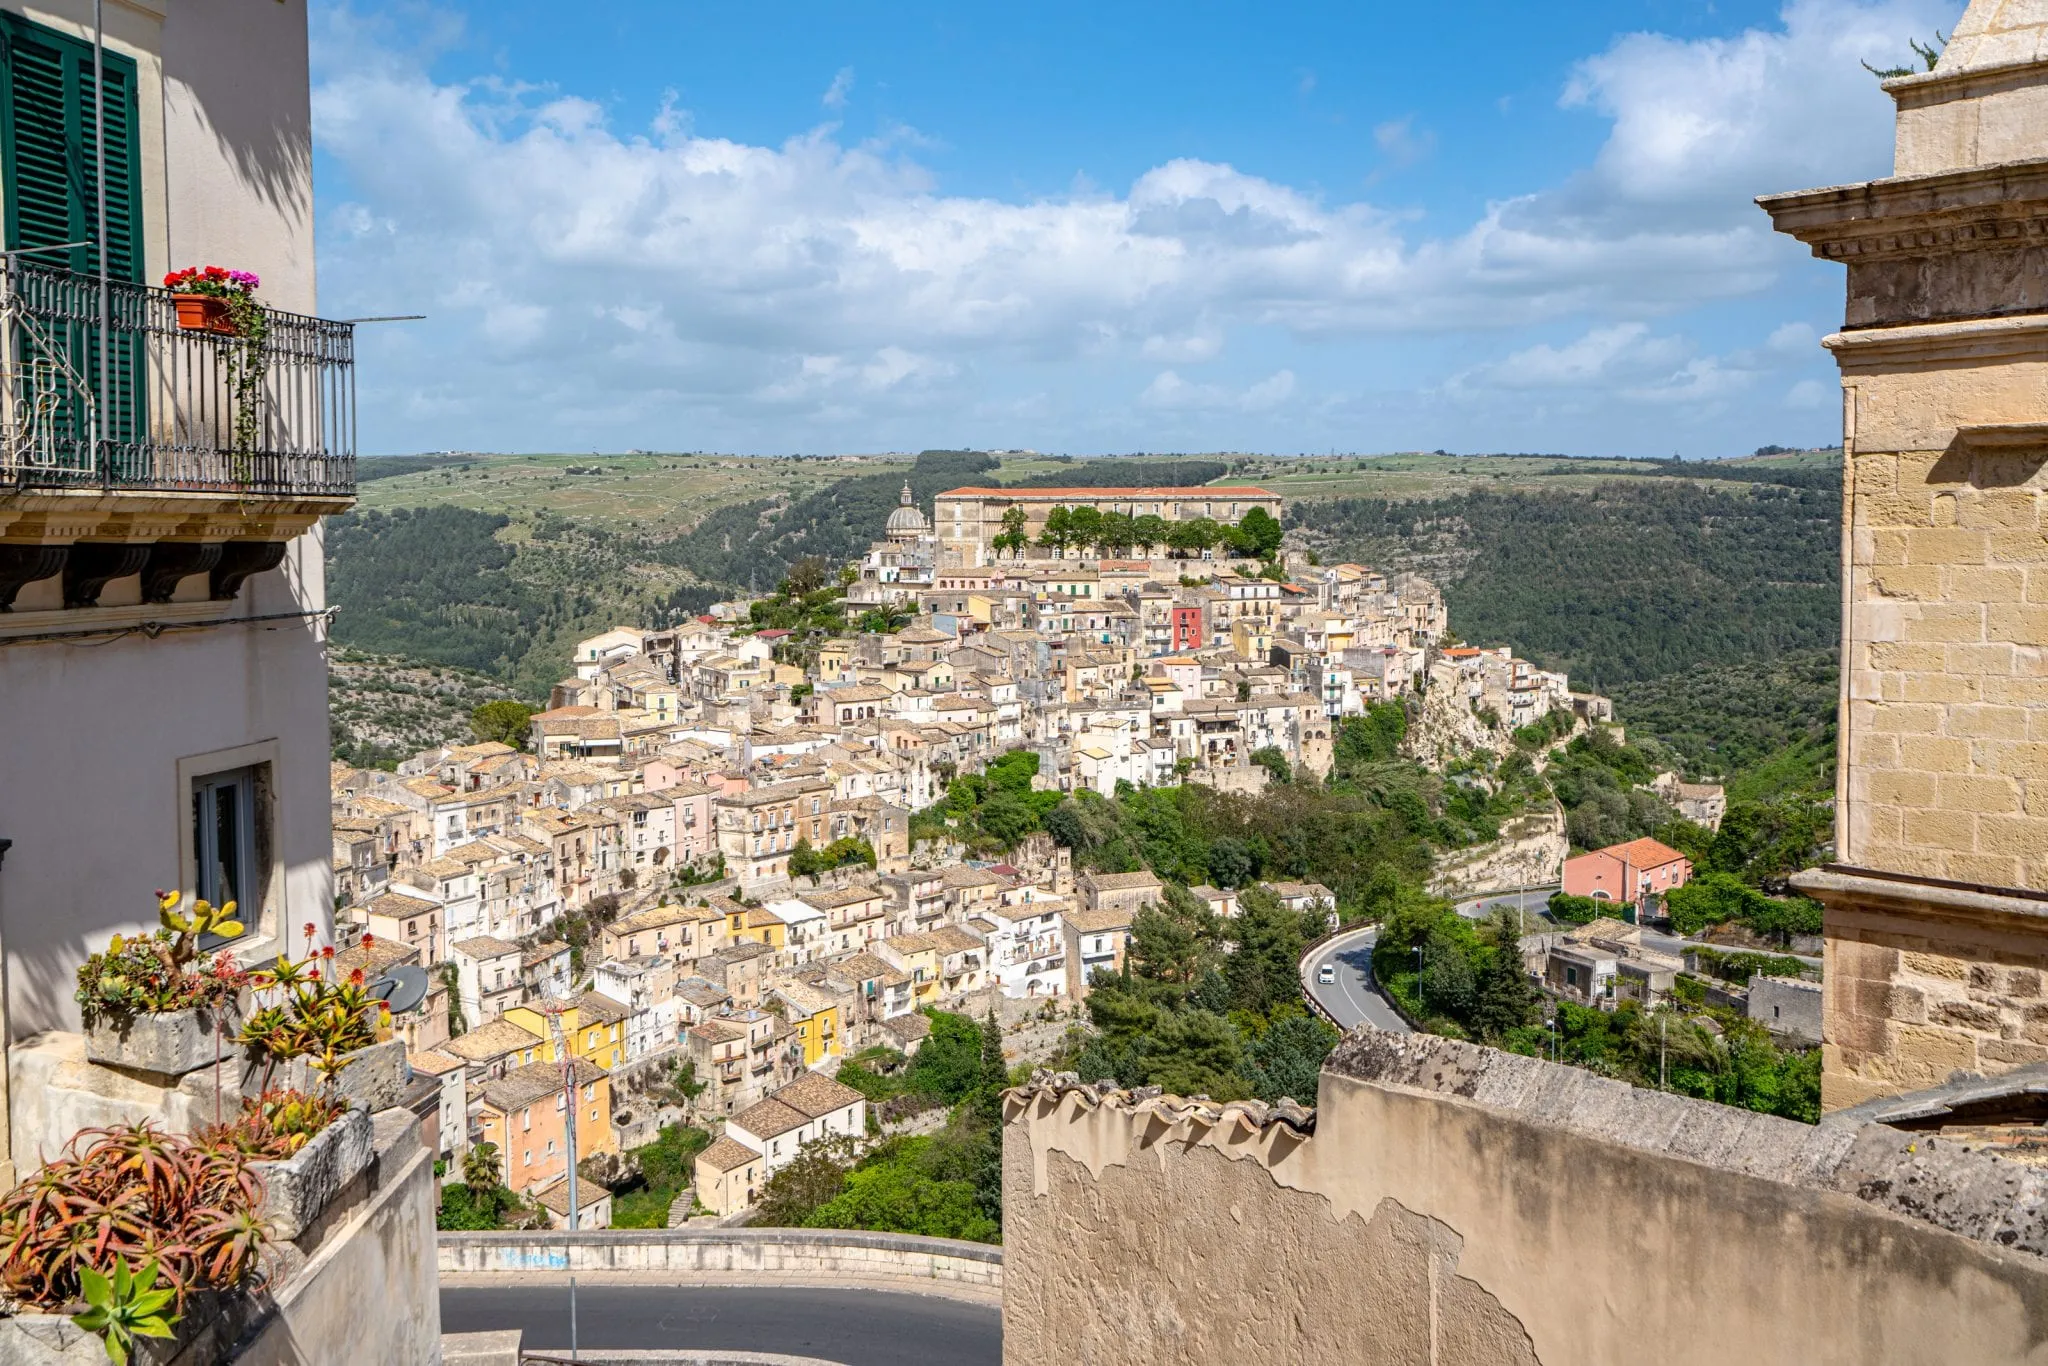 Ragusa Ilba as seen from above in the Val di Noto, a must-see place during a Sicily road trip itinerary